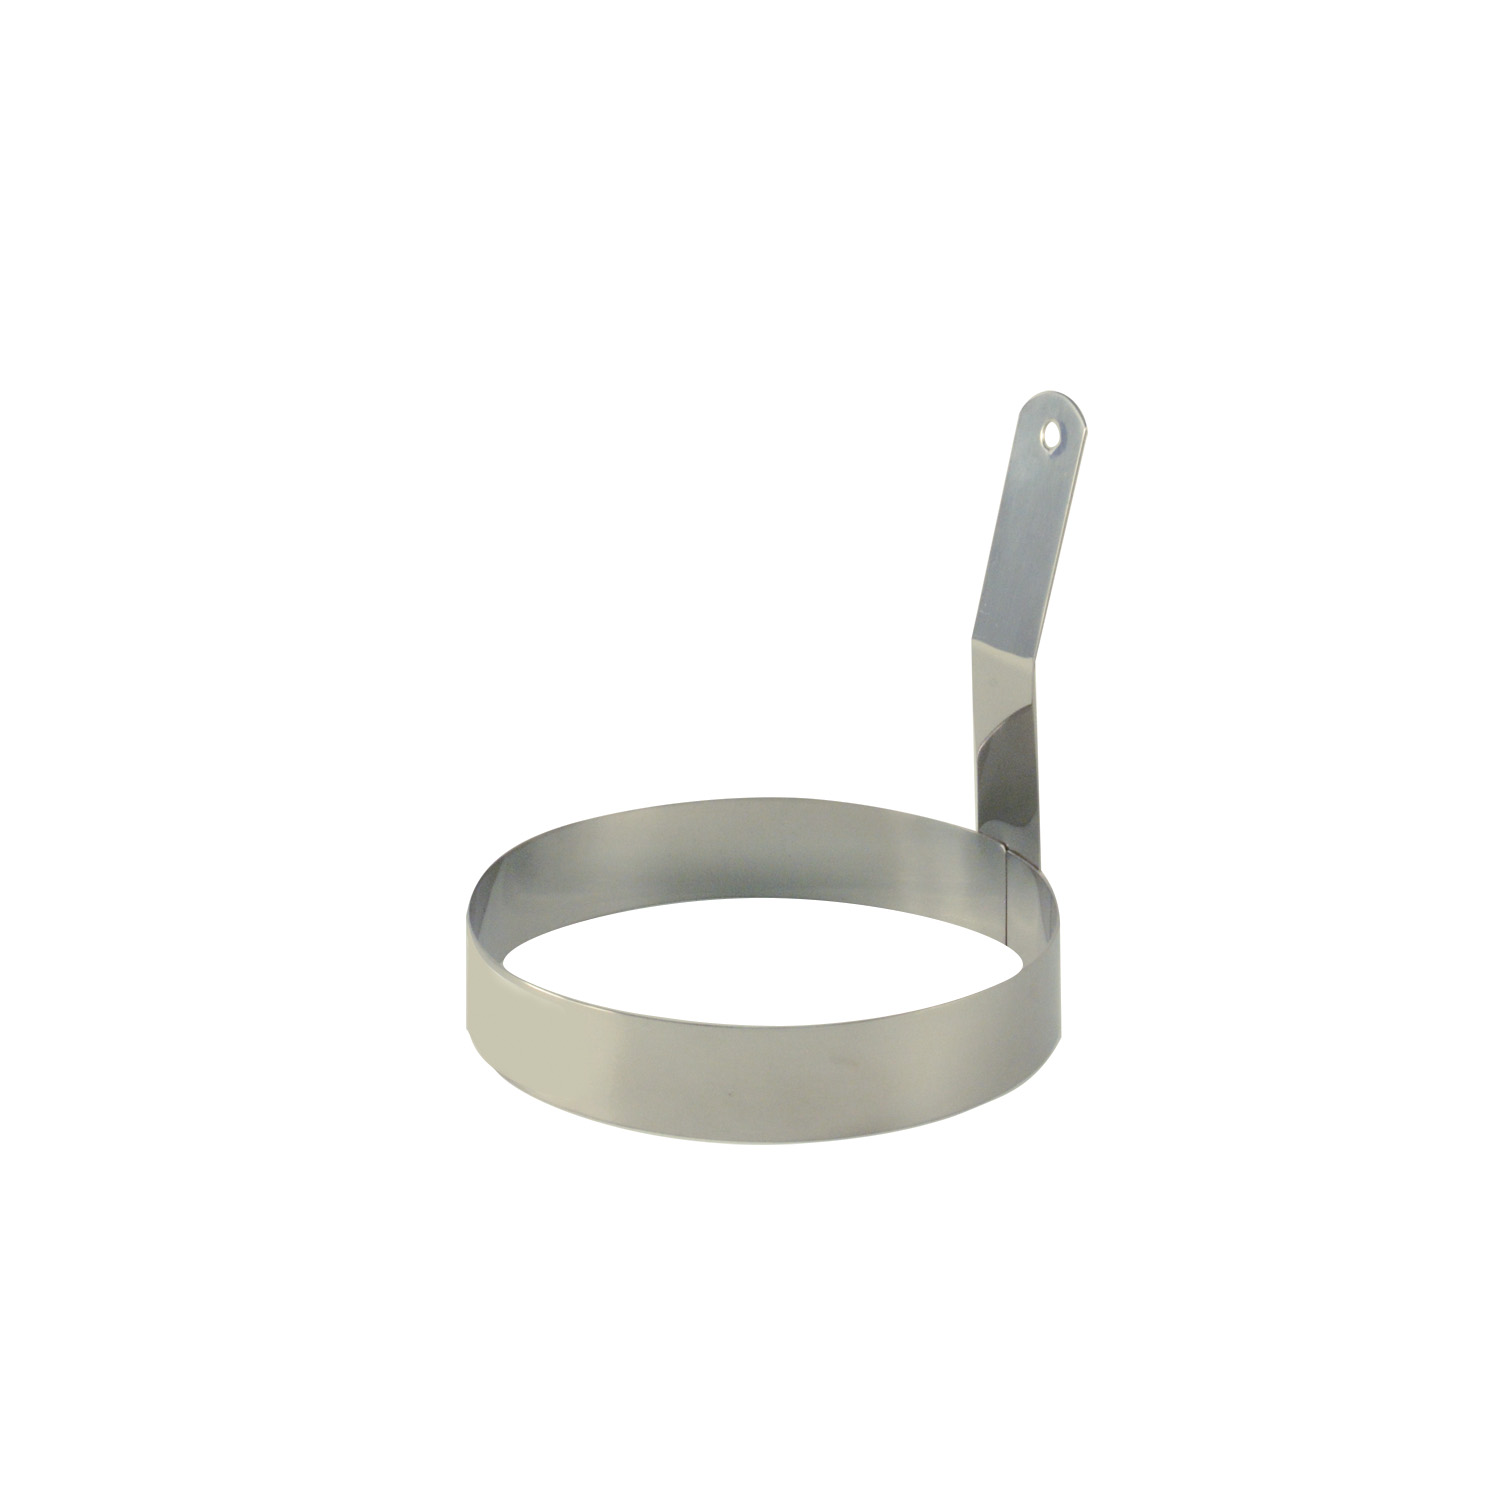 CAC China SEGR-5 Stainless Steel Egg Ring 5" Dia